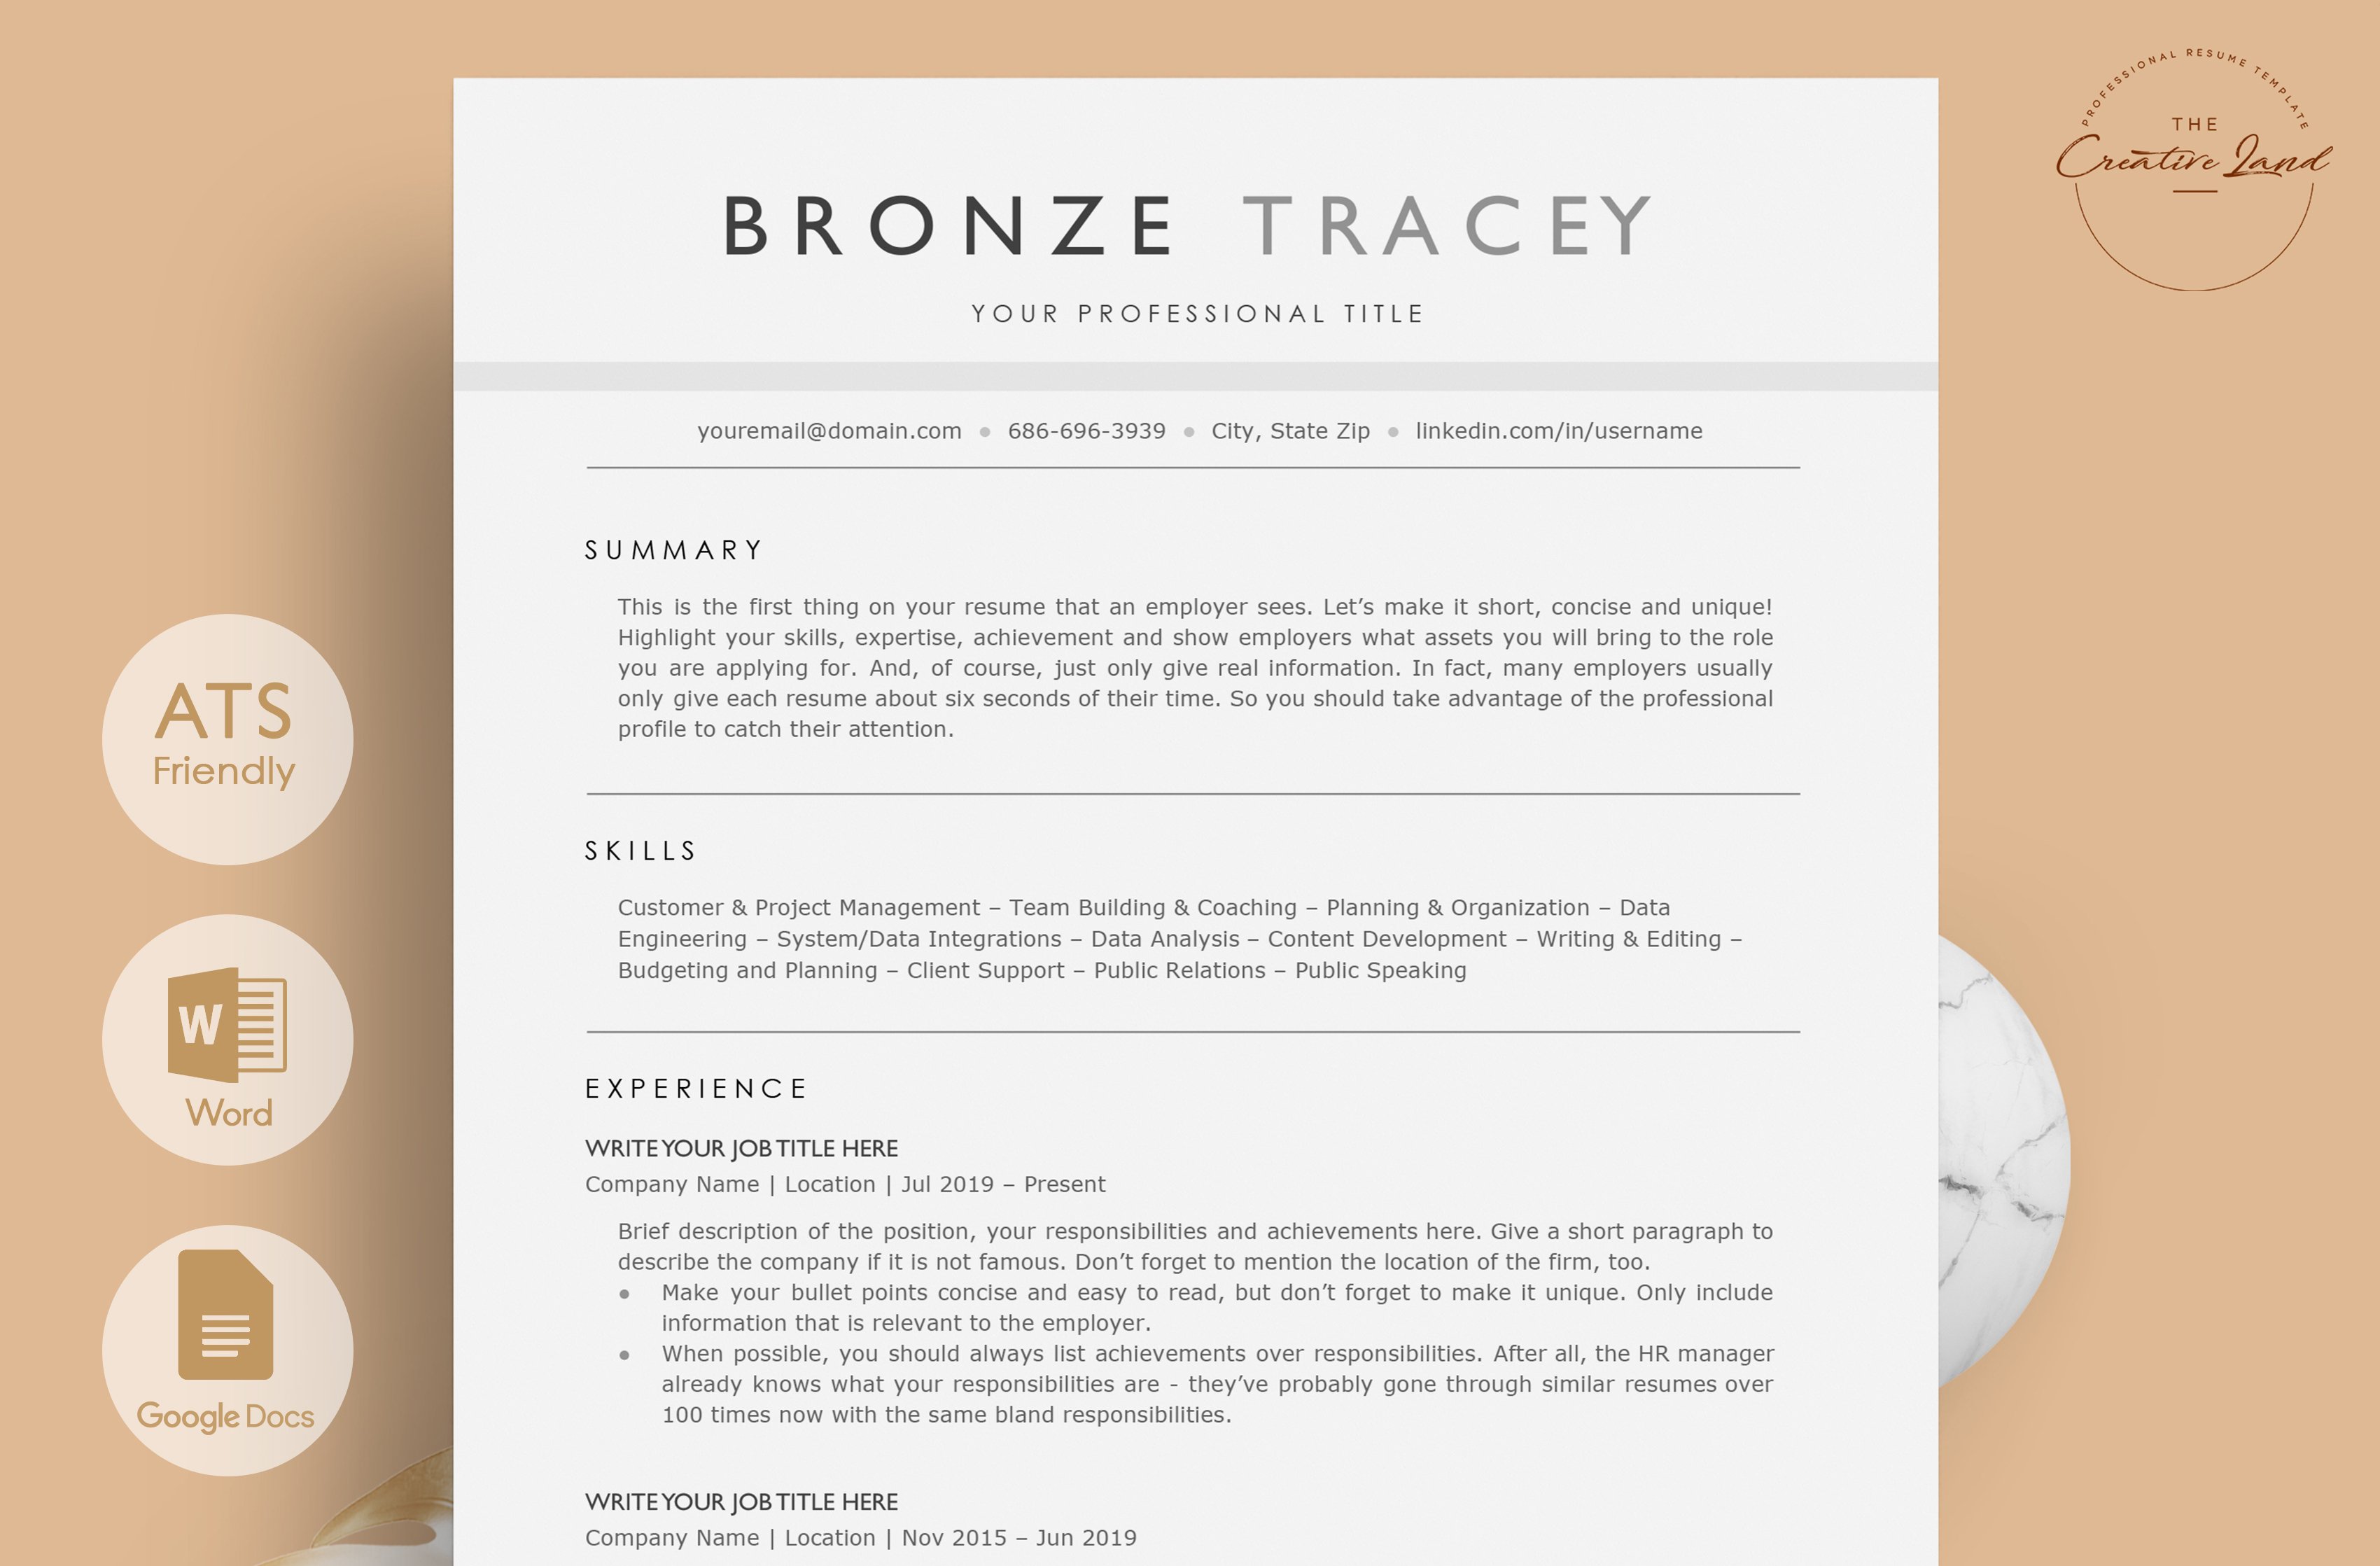 Clean ATS Resume/CV - The Bronze cover image.